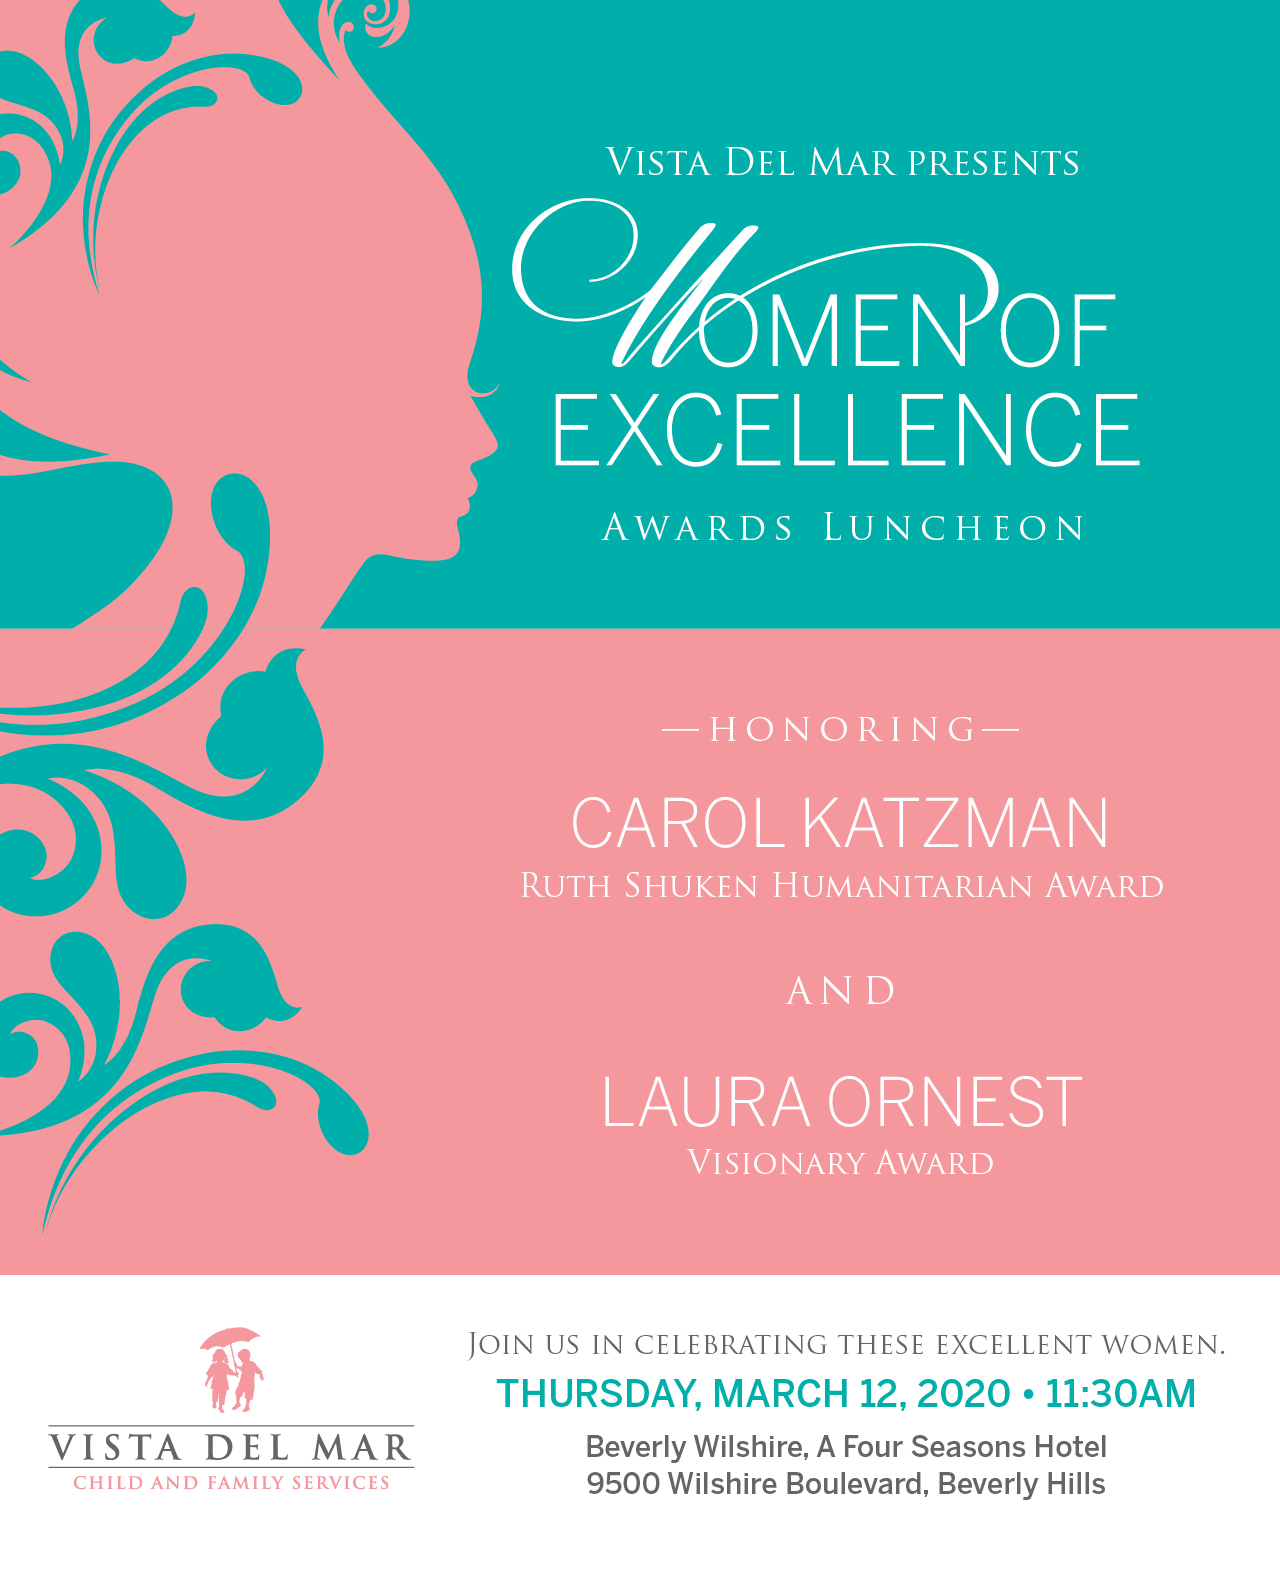 VISTA DEL MAR PRESENTS WOMEN OF EXCELLENCE AWARDS LUNCHEON HONORING CAROL KATZMAN (RUTH SHUKEN HUMANITARIAN AWARD), AND LAURA ORNEST (VISIONARY AWARD). JOIN US IN CELEBRATING THESE EXCELLENT WOMEN. THURSDAY, MARCH 12, 2020, 11:30 AM, Beverly Wilshire, A Four Seasons Hotel, 9500 Wilshire Boulevard, Beverly Hills, CA 90212